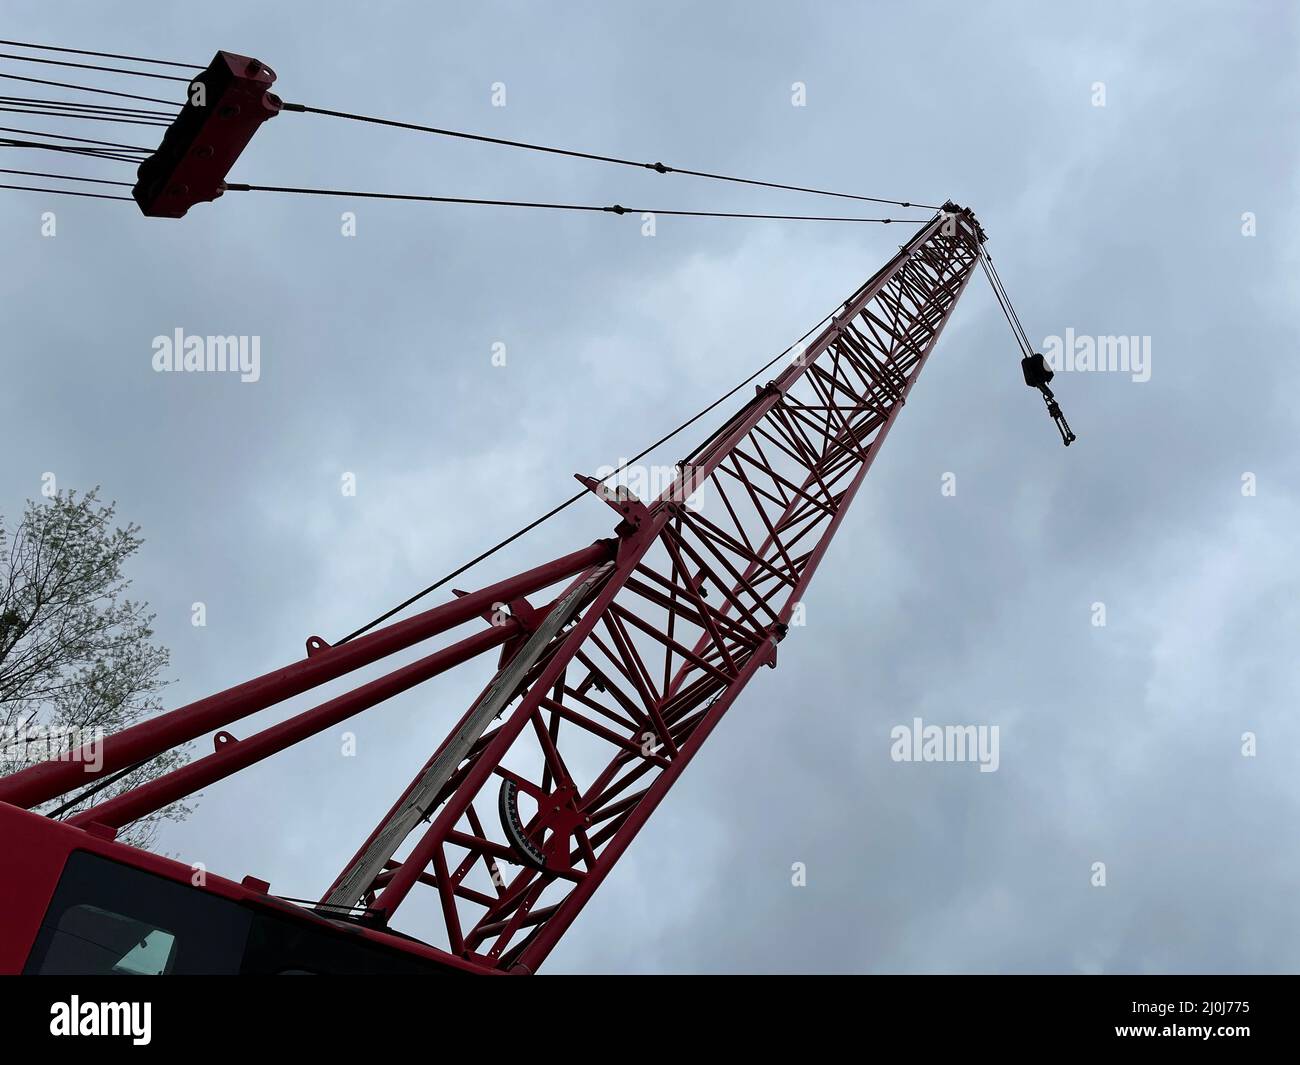 Augusta, Ga USA - 03 19 22: Manitowoc Red Crane Construction scene cloudy rainy day looking up at boom Stock Photo